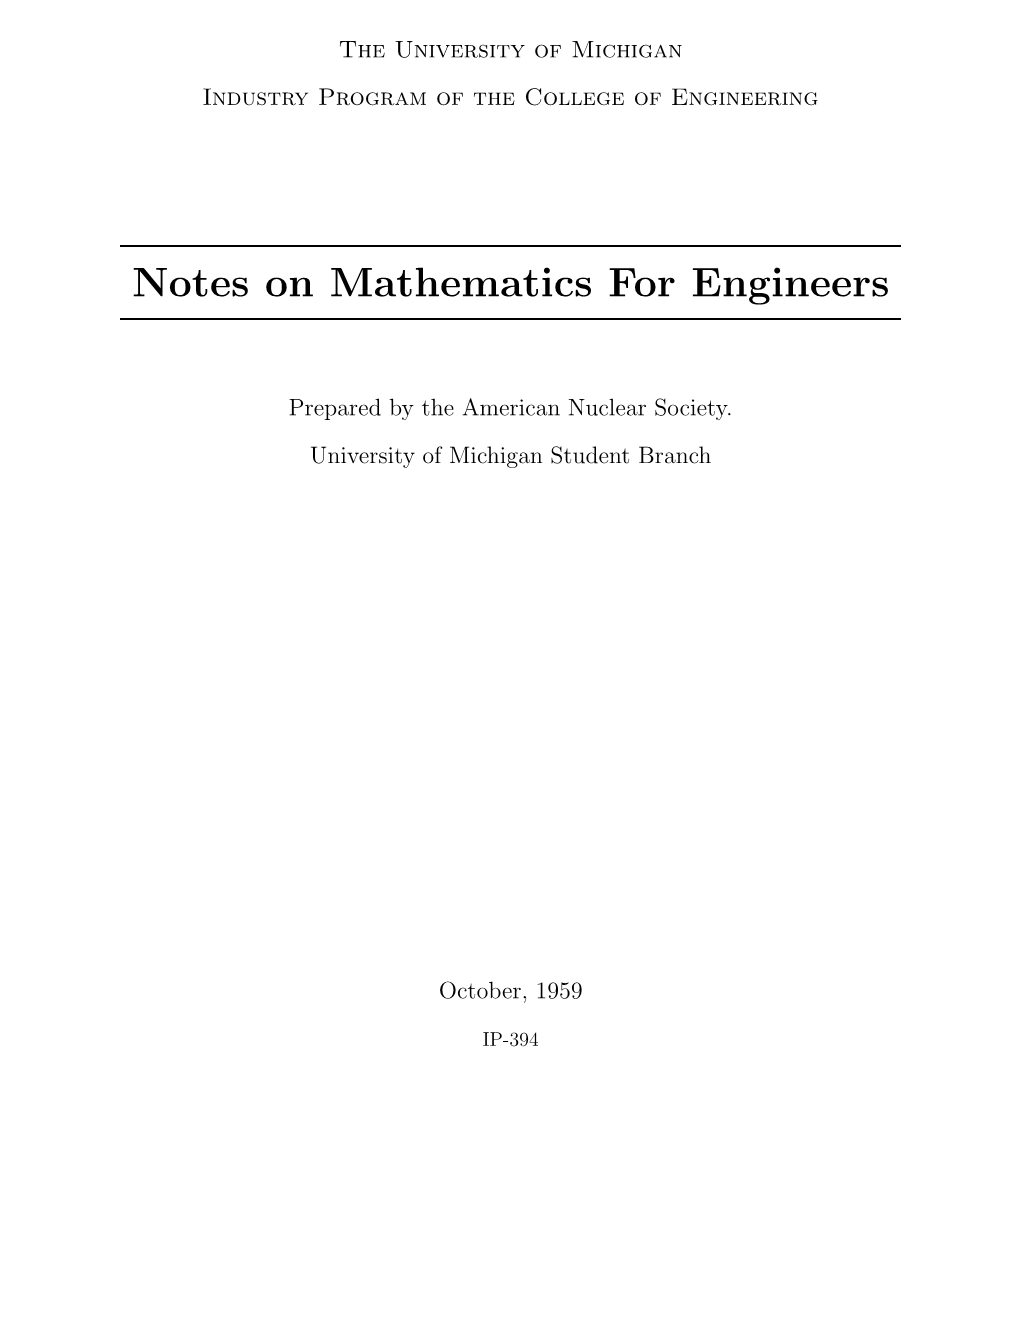 Notes on Mathematics for Engineers